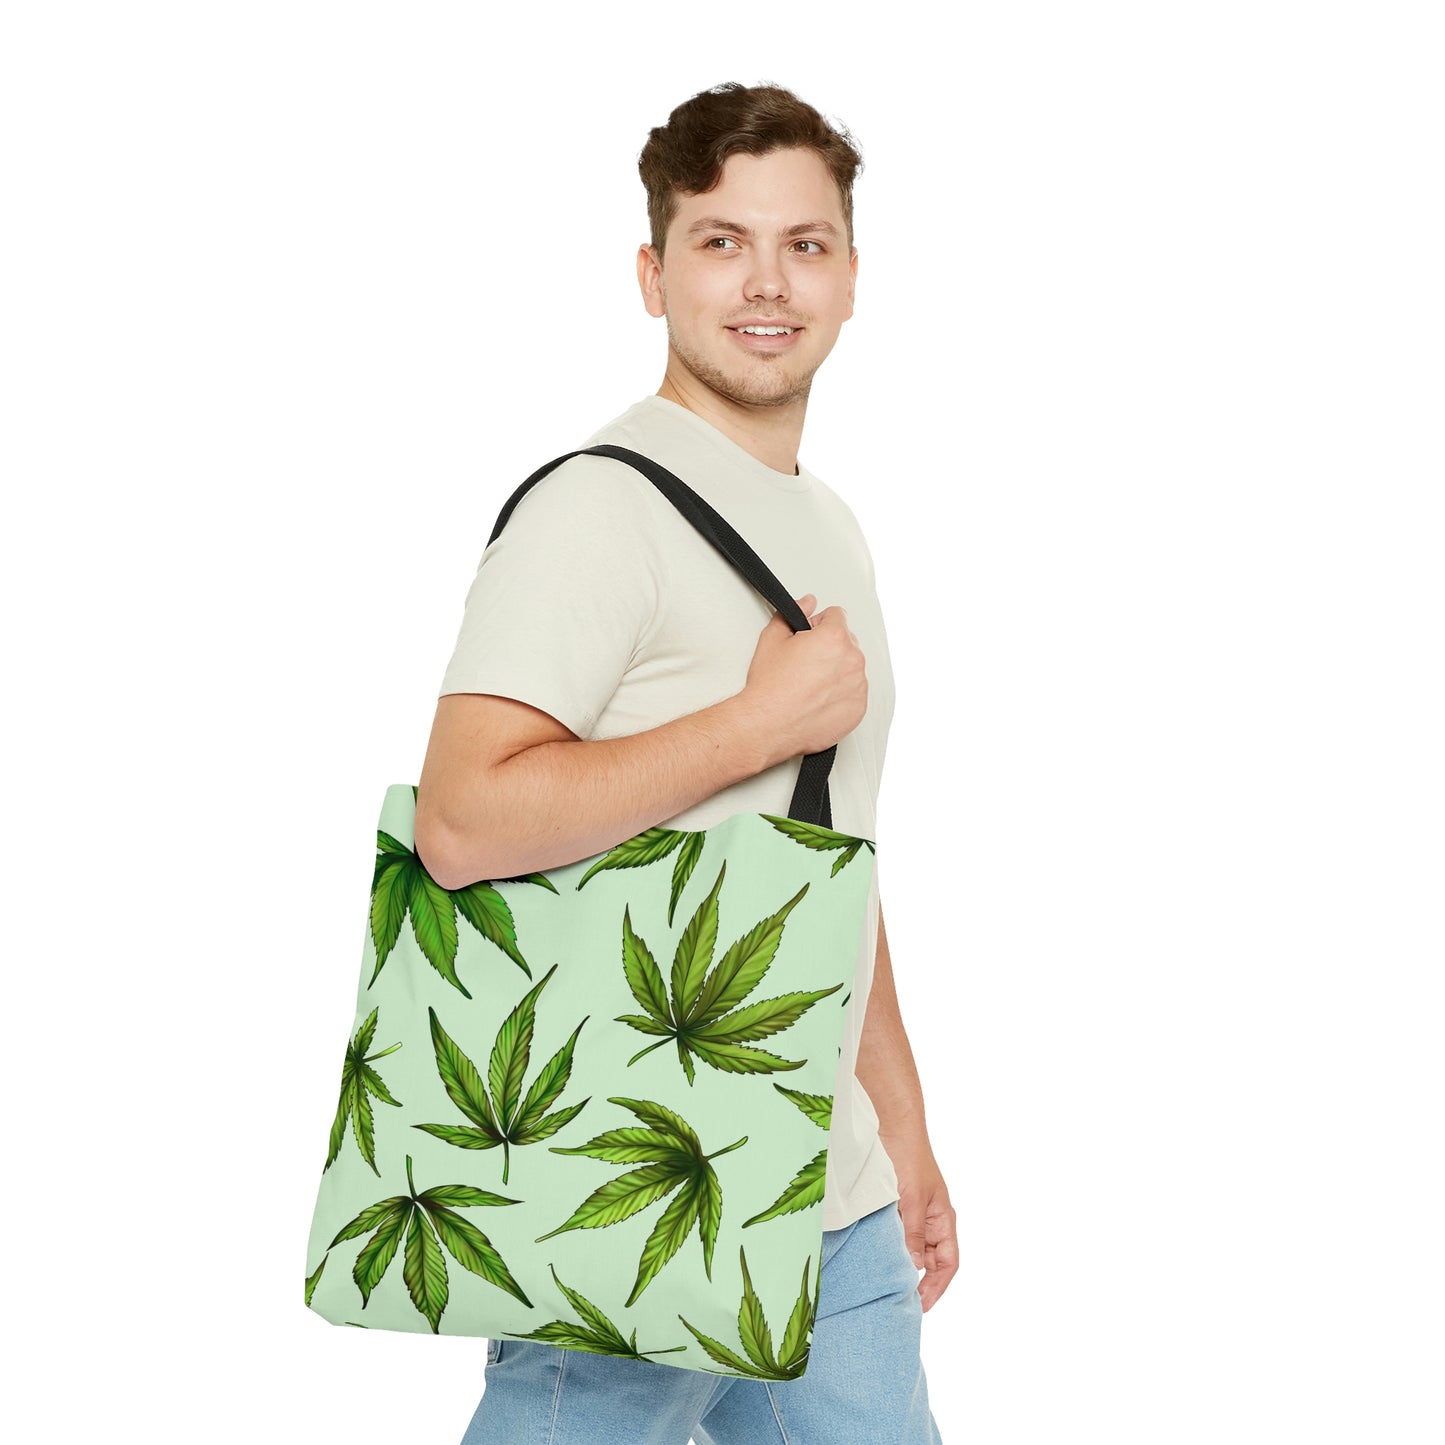 A man is happily staring while wearing the Marijuana Leaves Green Tote Bag 